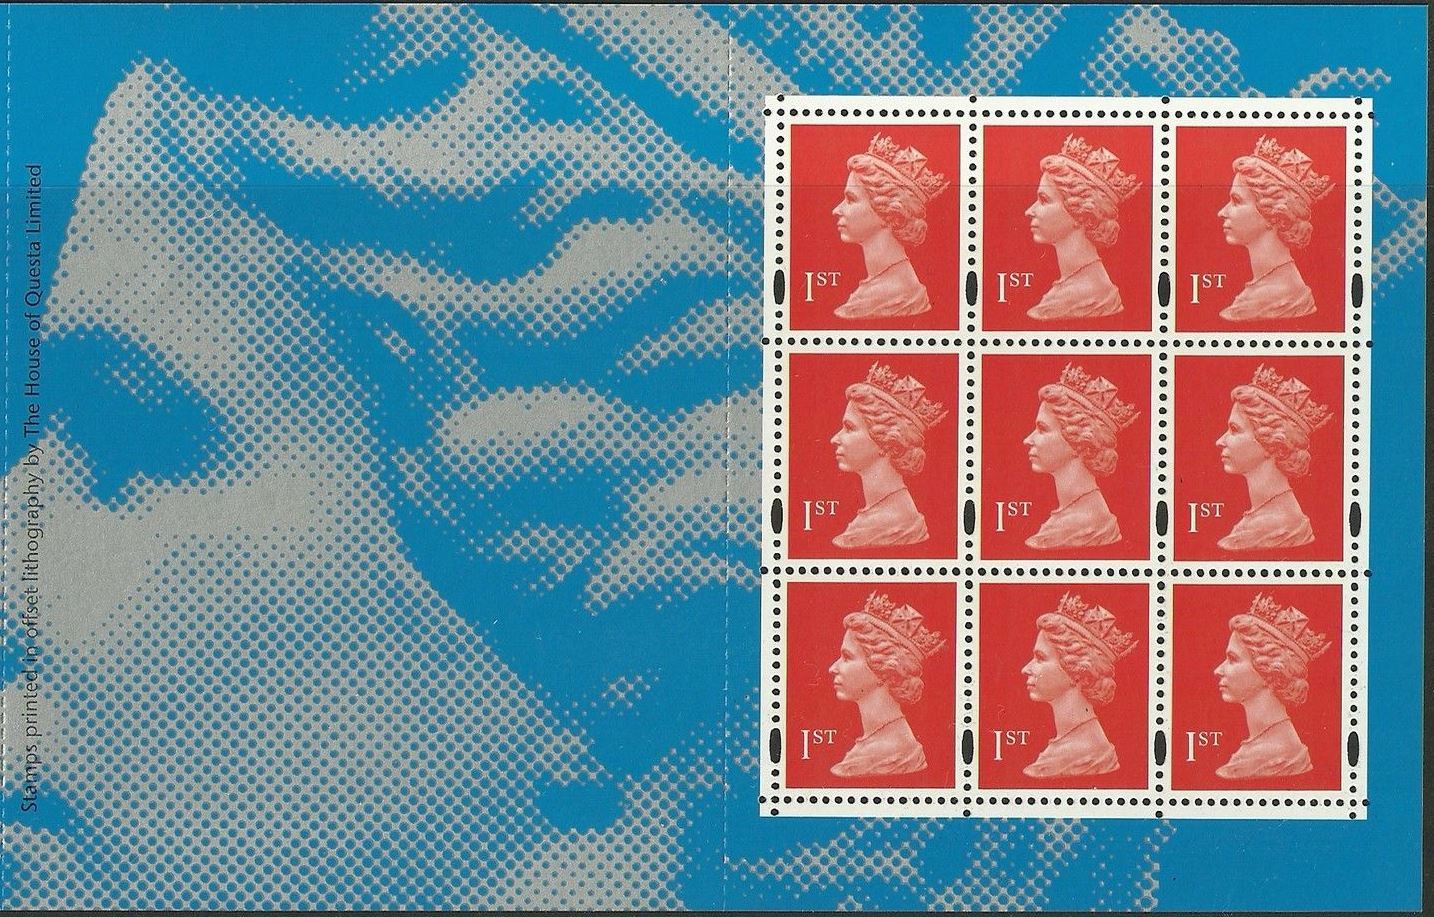 1999 GB - SG1671n (DP284) 1st Flame Pane (Q) from DX22 MNH